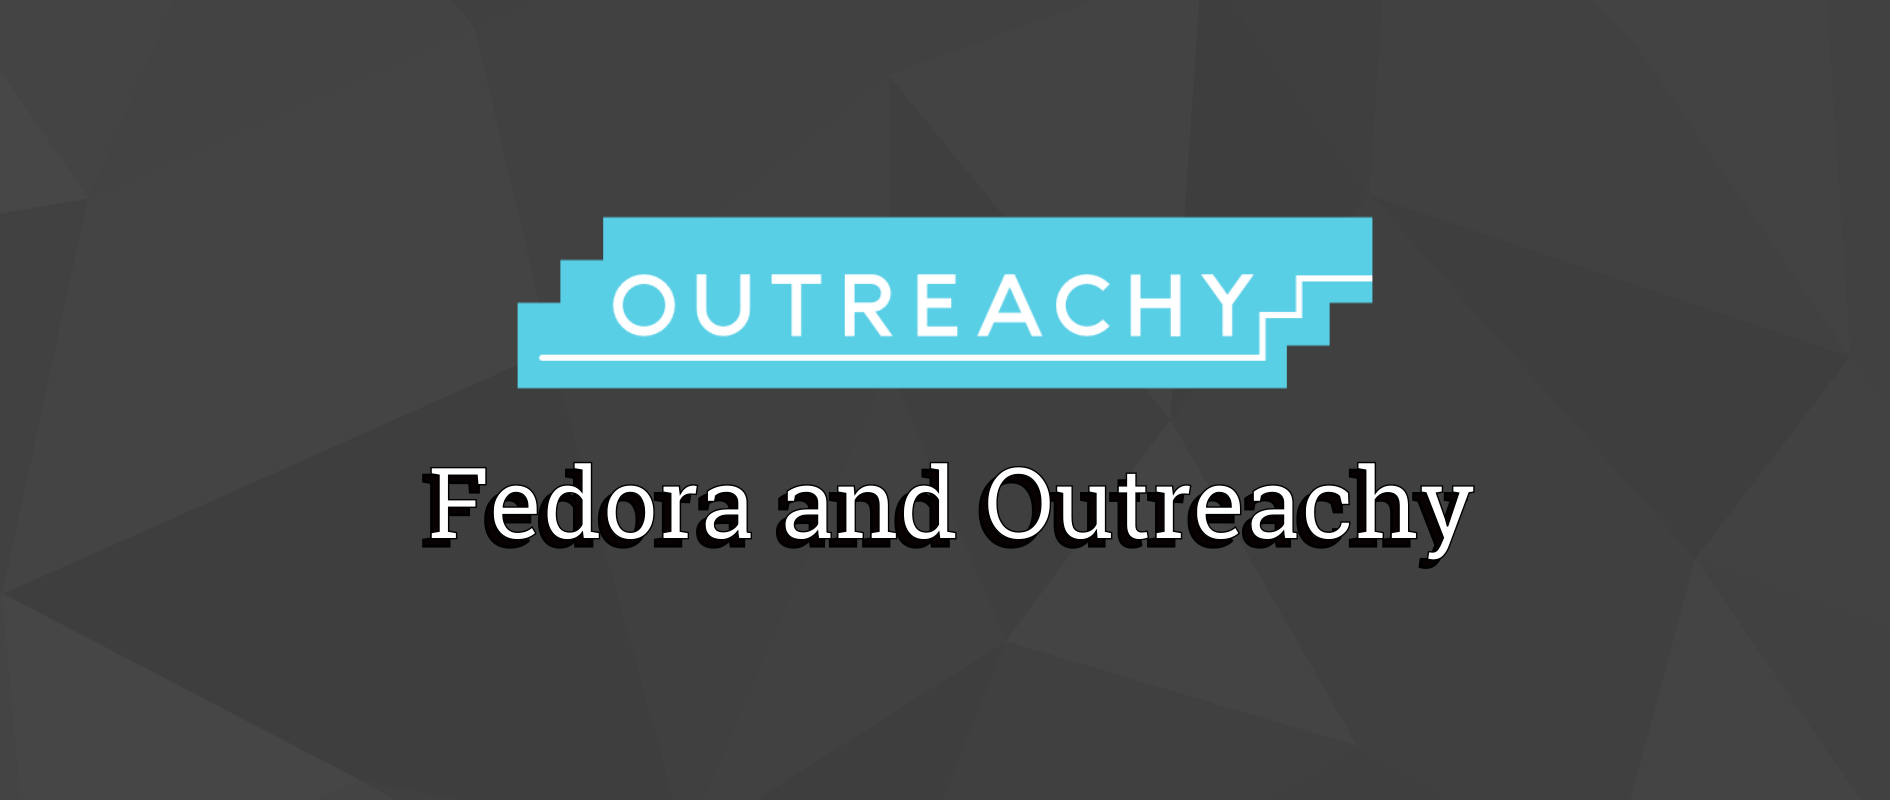 Fedora Project and Outreachy internship program for underrepresented groups in open source